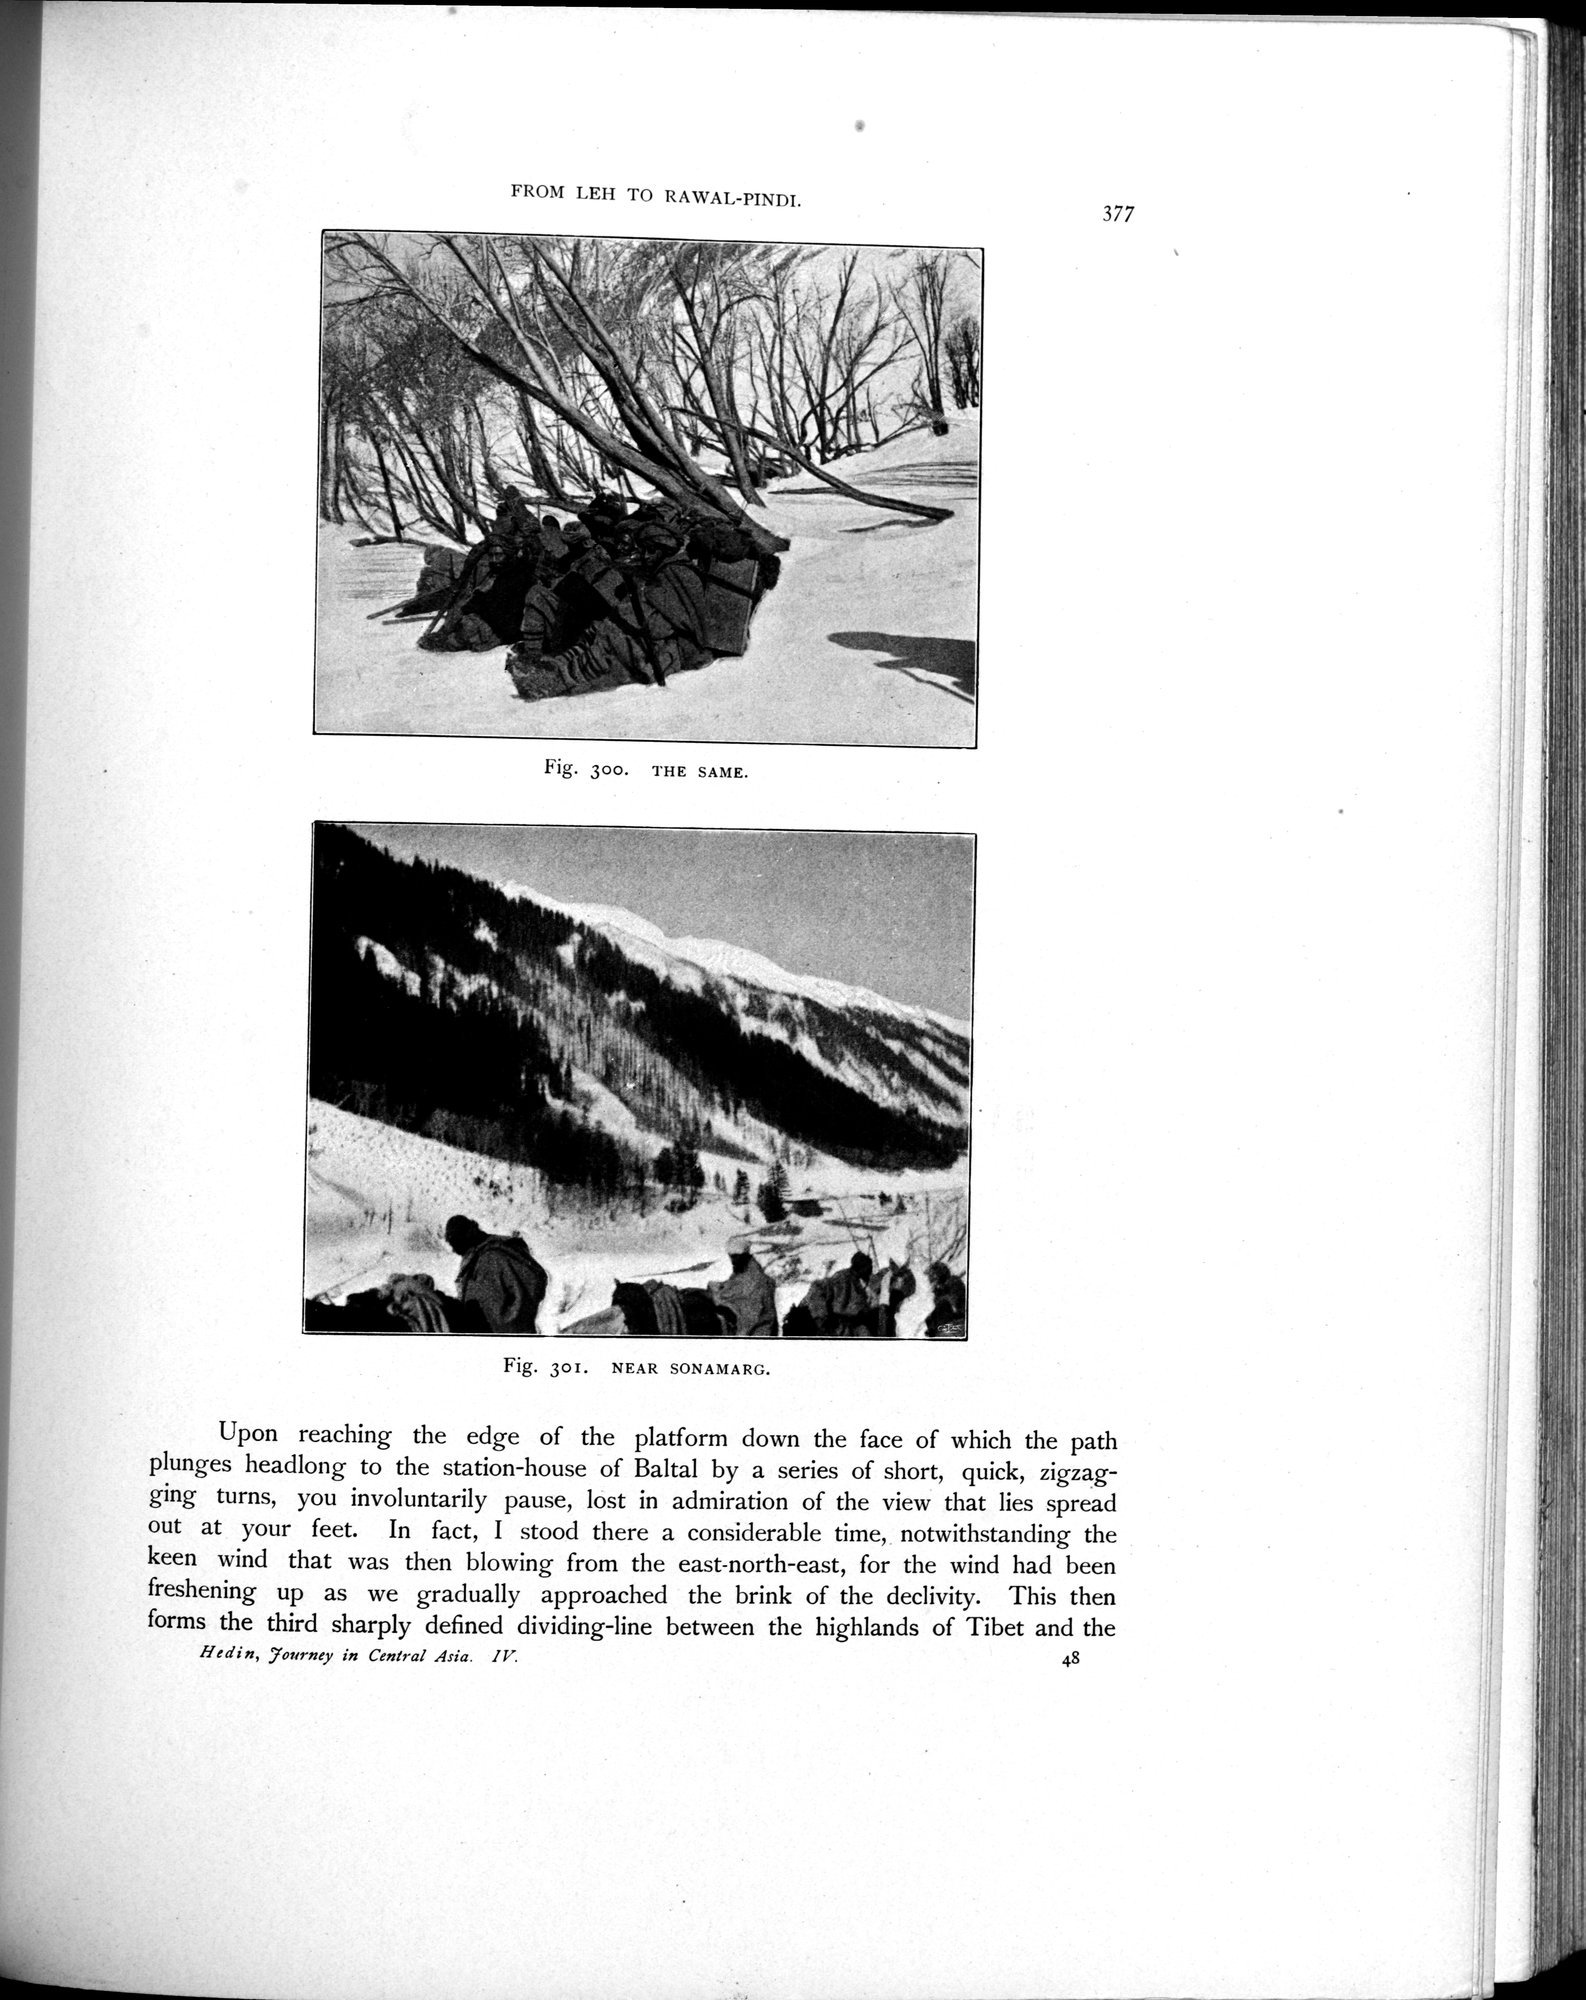 Scientific Results of a Journey in Central Asia, 1899-1902 : vol.4 / 533 ページ（白黒高解像度画像）